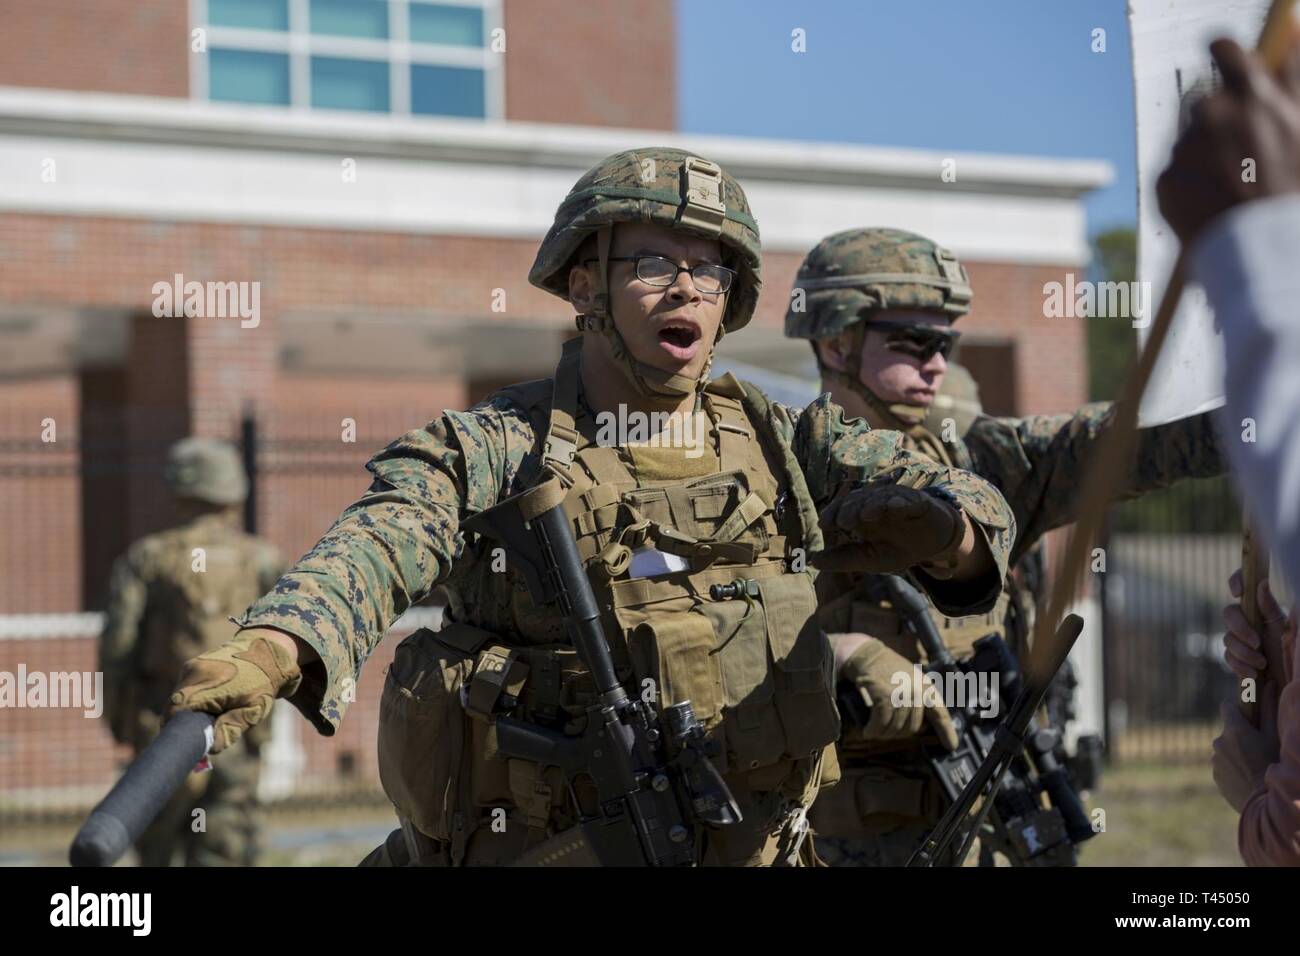 Marine Sgt. Anthony Ramos deescalates a simulated hostile situation with rioters during a noncombatant evacuation operation training event on Stone Bay, North Carolina, Feb. 25, 2019. The purpose of NEO exercise is to familiarize Marines with civilian evacuation, increase crowd control proficiency, and employ appropriate escalation of force procedures. Ramos is an infantry Marine with 1st Battalion, 8th Marine Regiment, 24th Marine Expeditionary Unit. Stock Photo